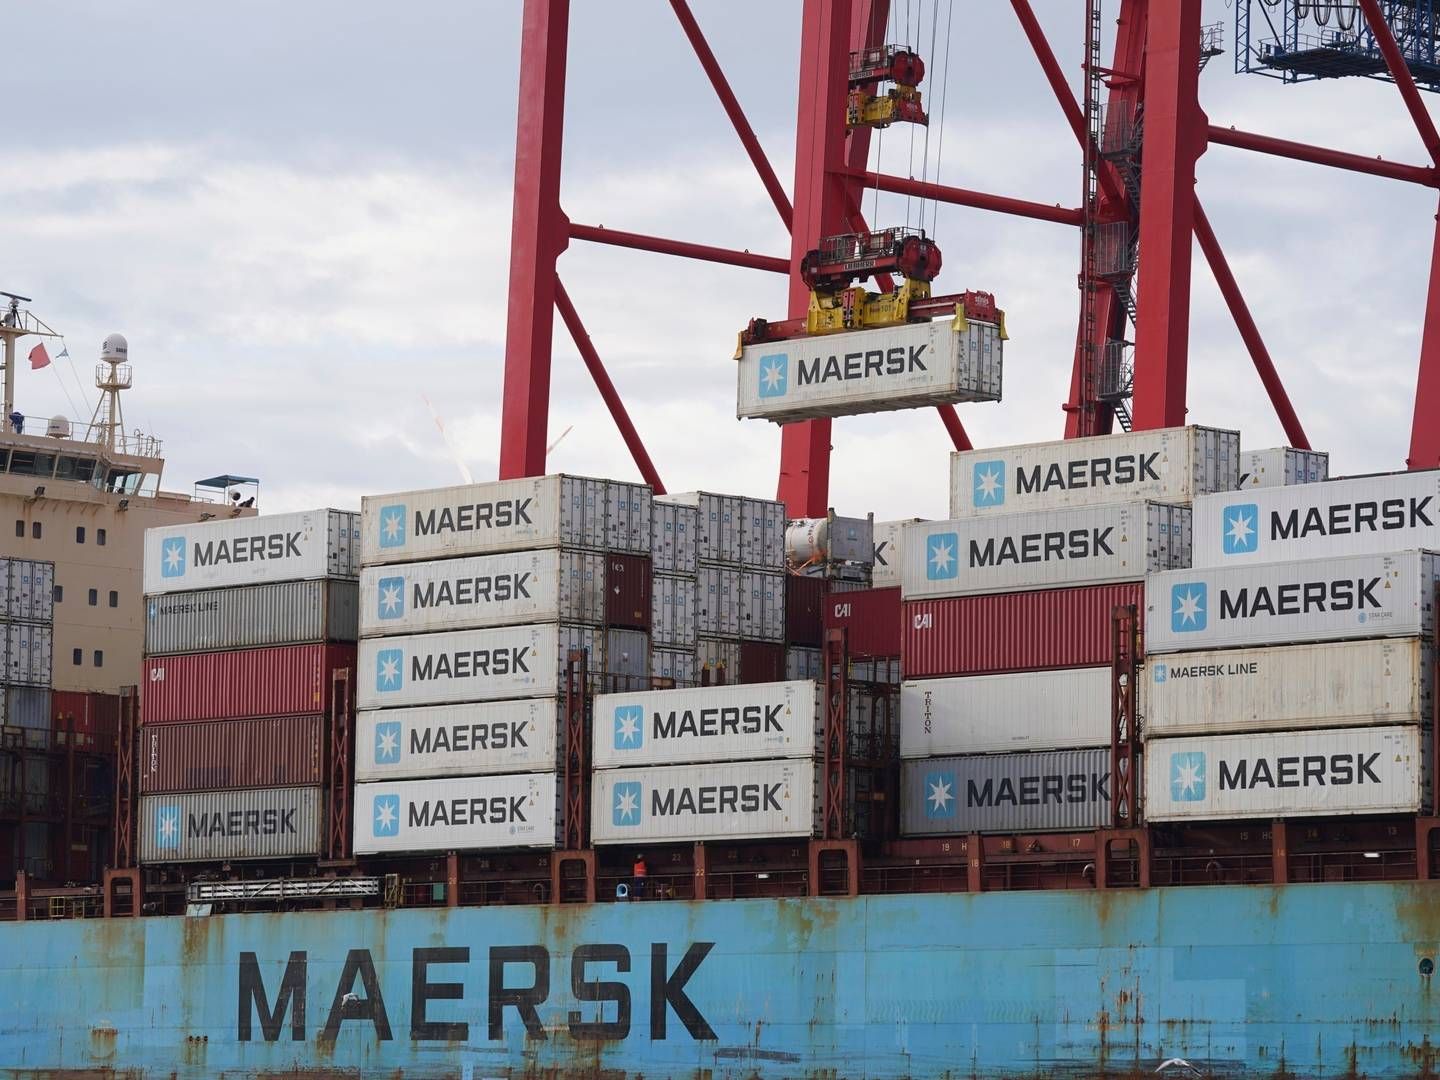 Maersk has the stated goal of reaching net-zero emissions by 2040, which requires that ships sail on green alternatives to traditional bunker oil. | Foto: Marcus Brandt/AP/Ritzau Scanpix